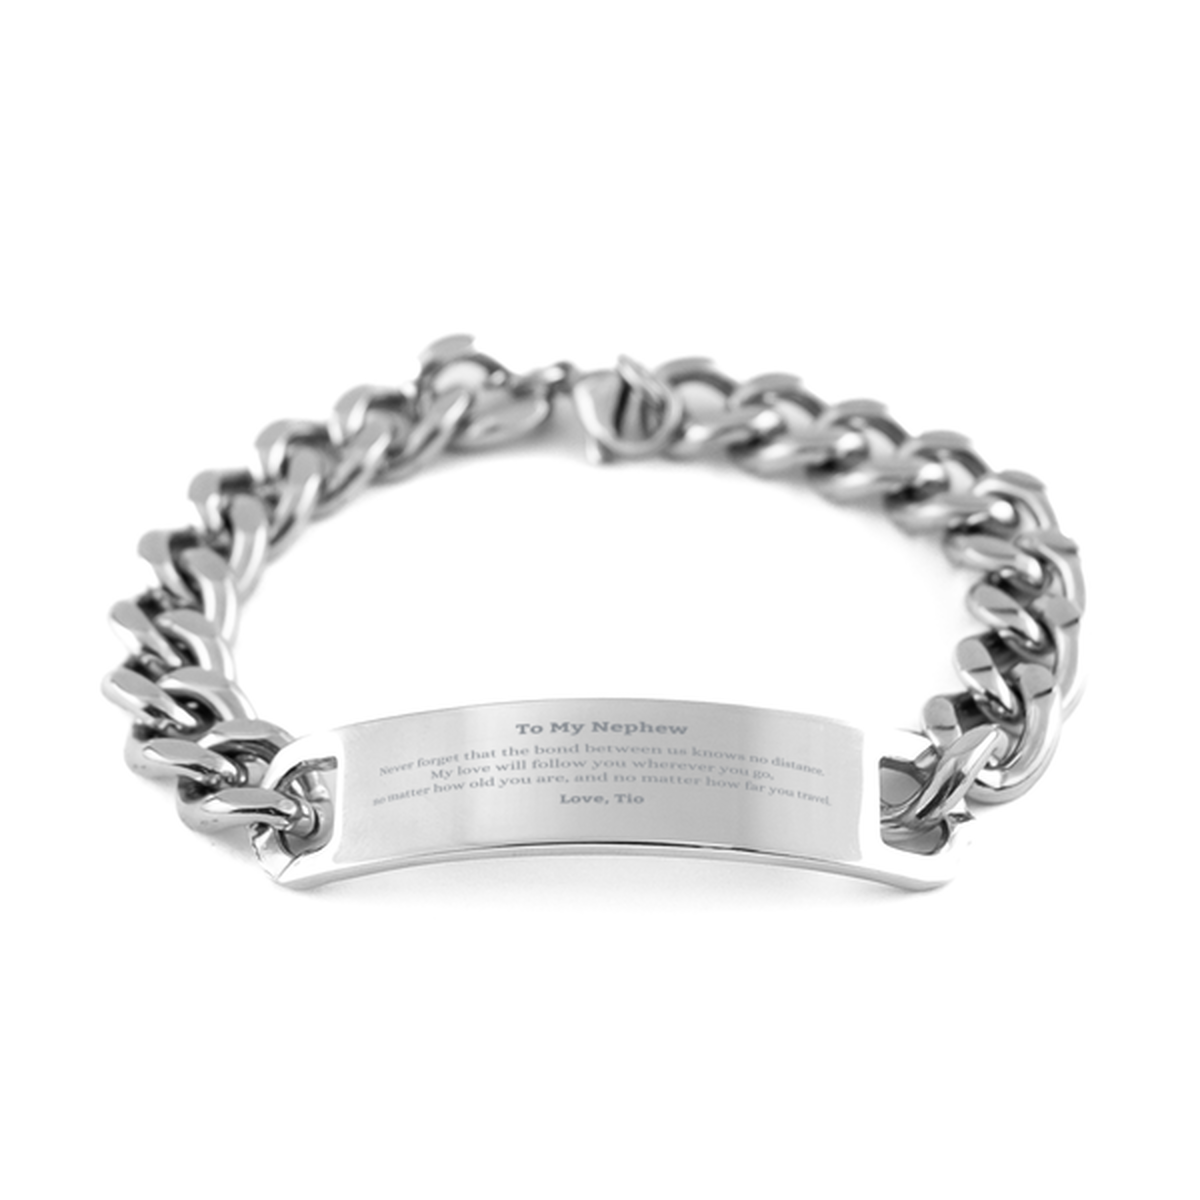 Nephew Birthday Gifts from Tio, Adjustable Cuban Chain Stainless Steel Bracelet for Nephew Christmas Graduation Unique Gifts Nephew Never forget that the bond between us knows no distance. Love, Tio